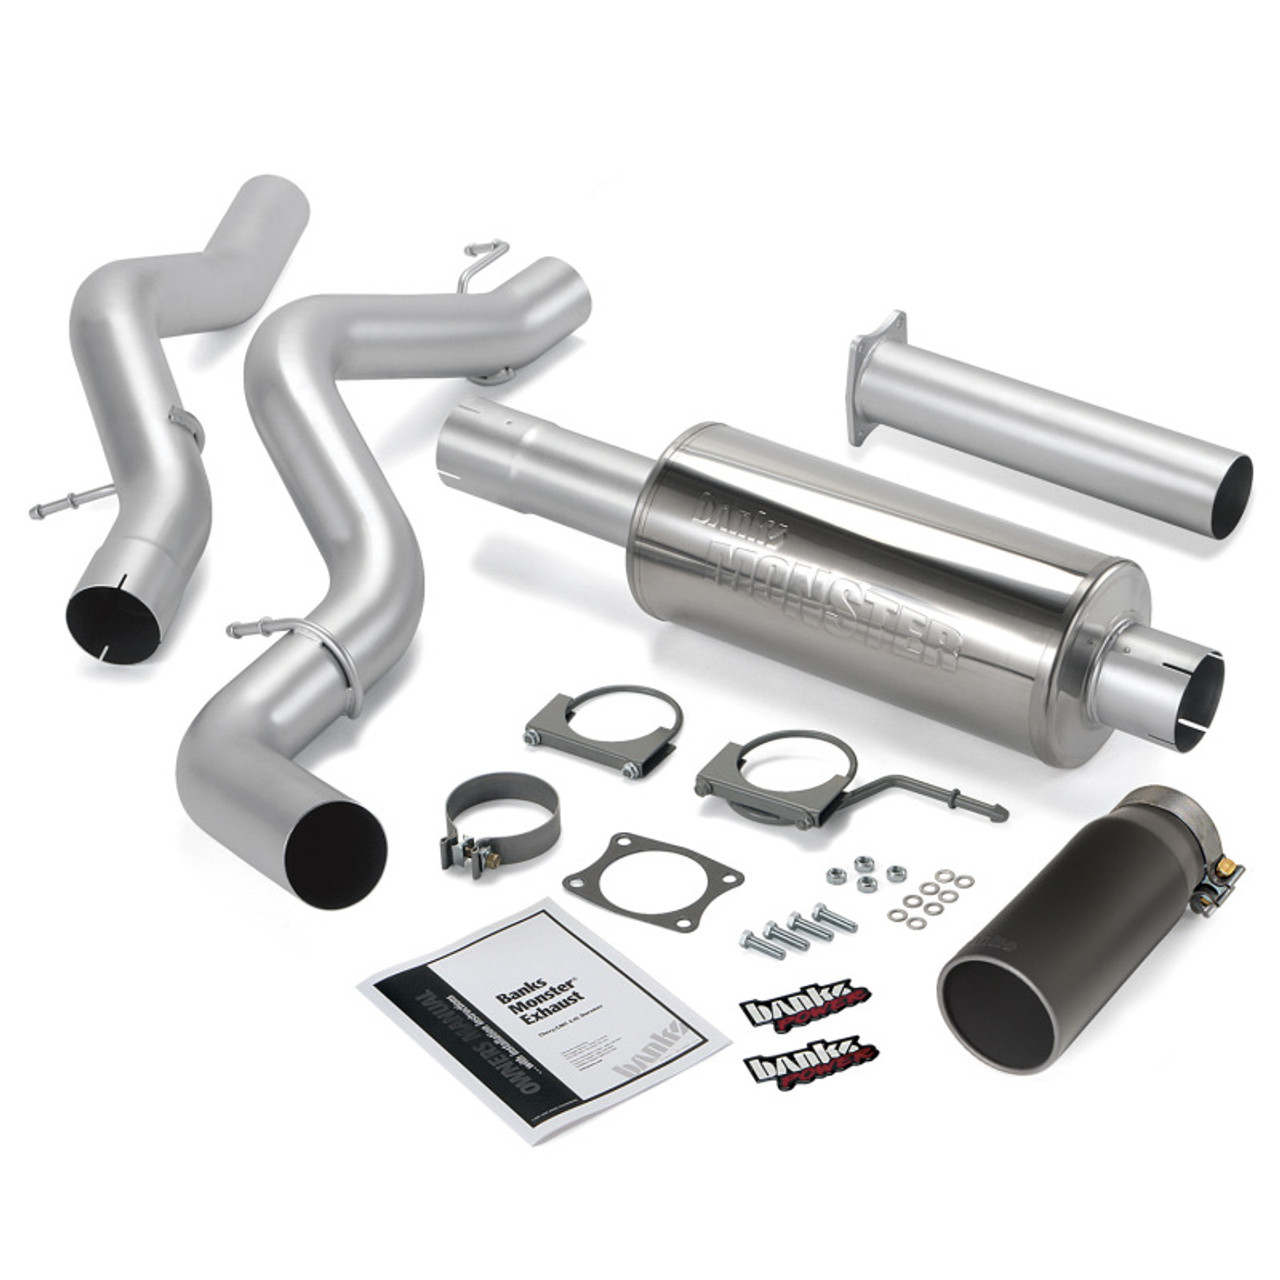 Monster Exhaust System For 1999-2003 Ford F250/F350 Power, 60% OFF